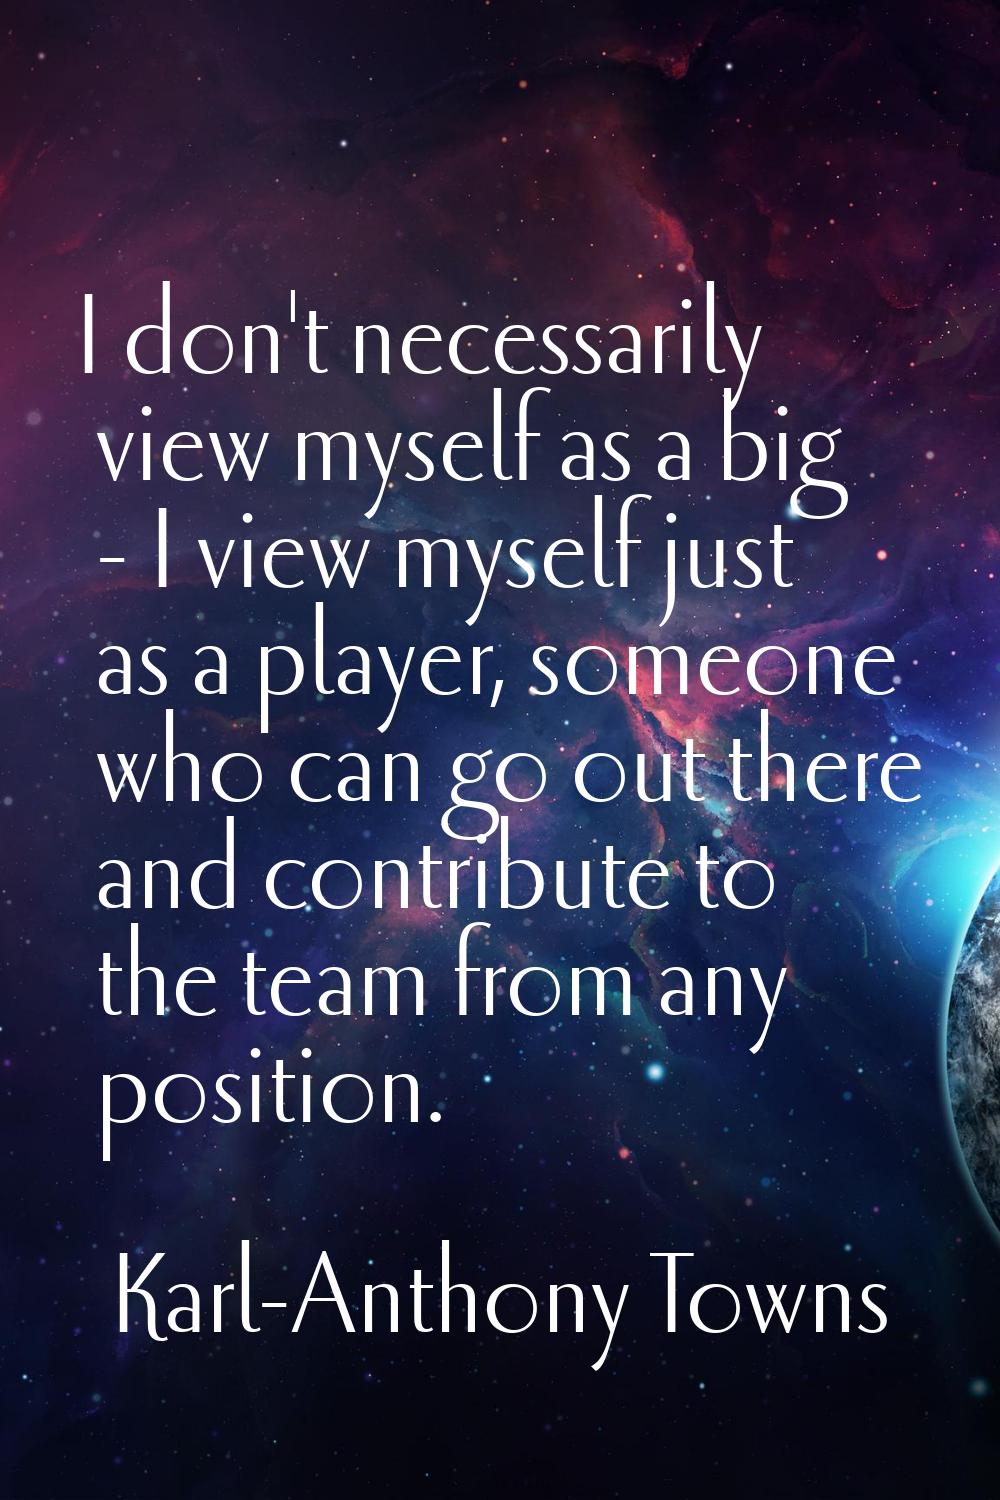 I don't necessarily view myself as a big - I view myself just as a player, someone who can go out t